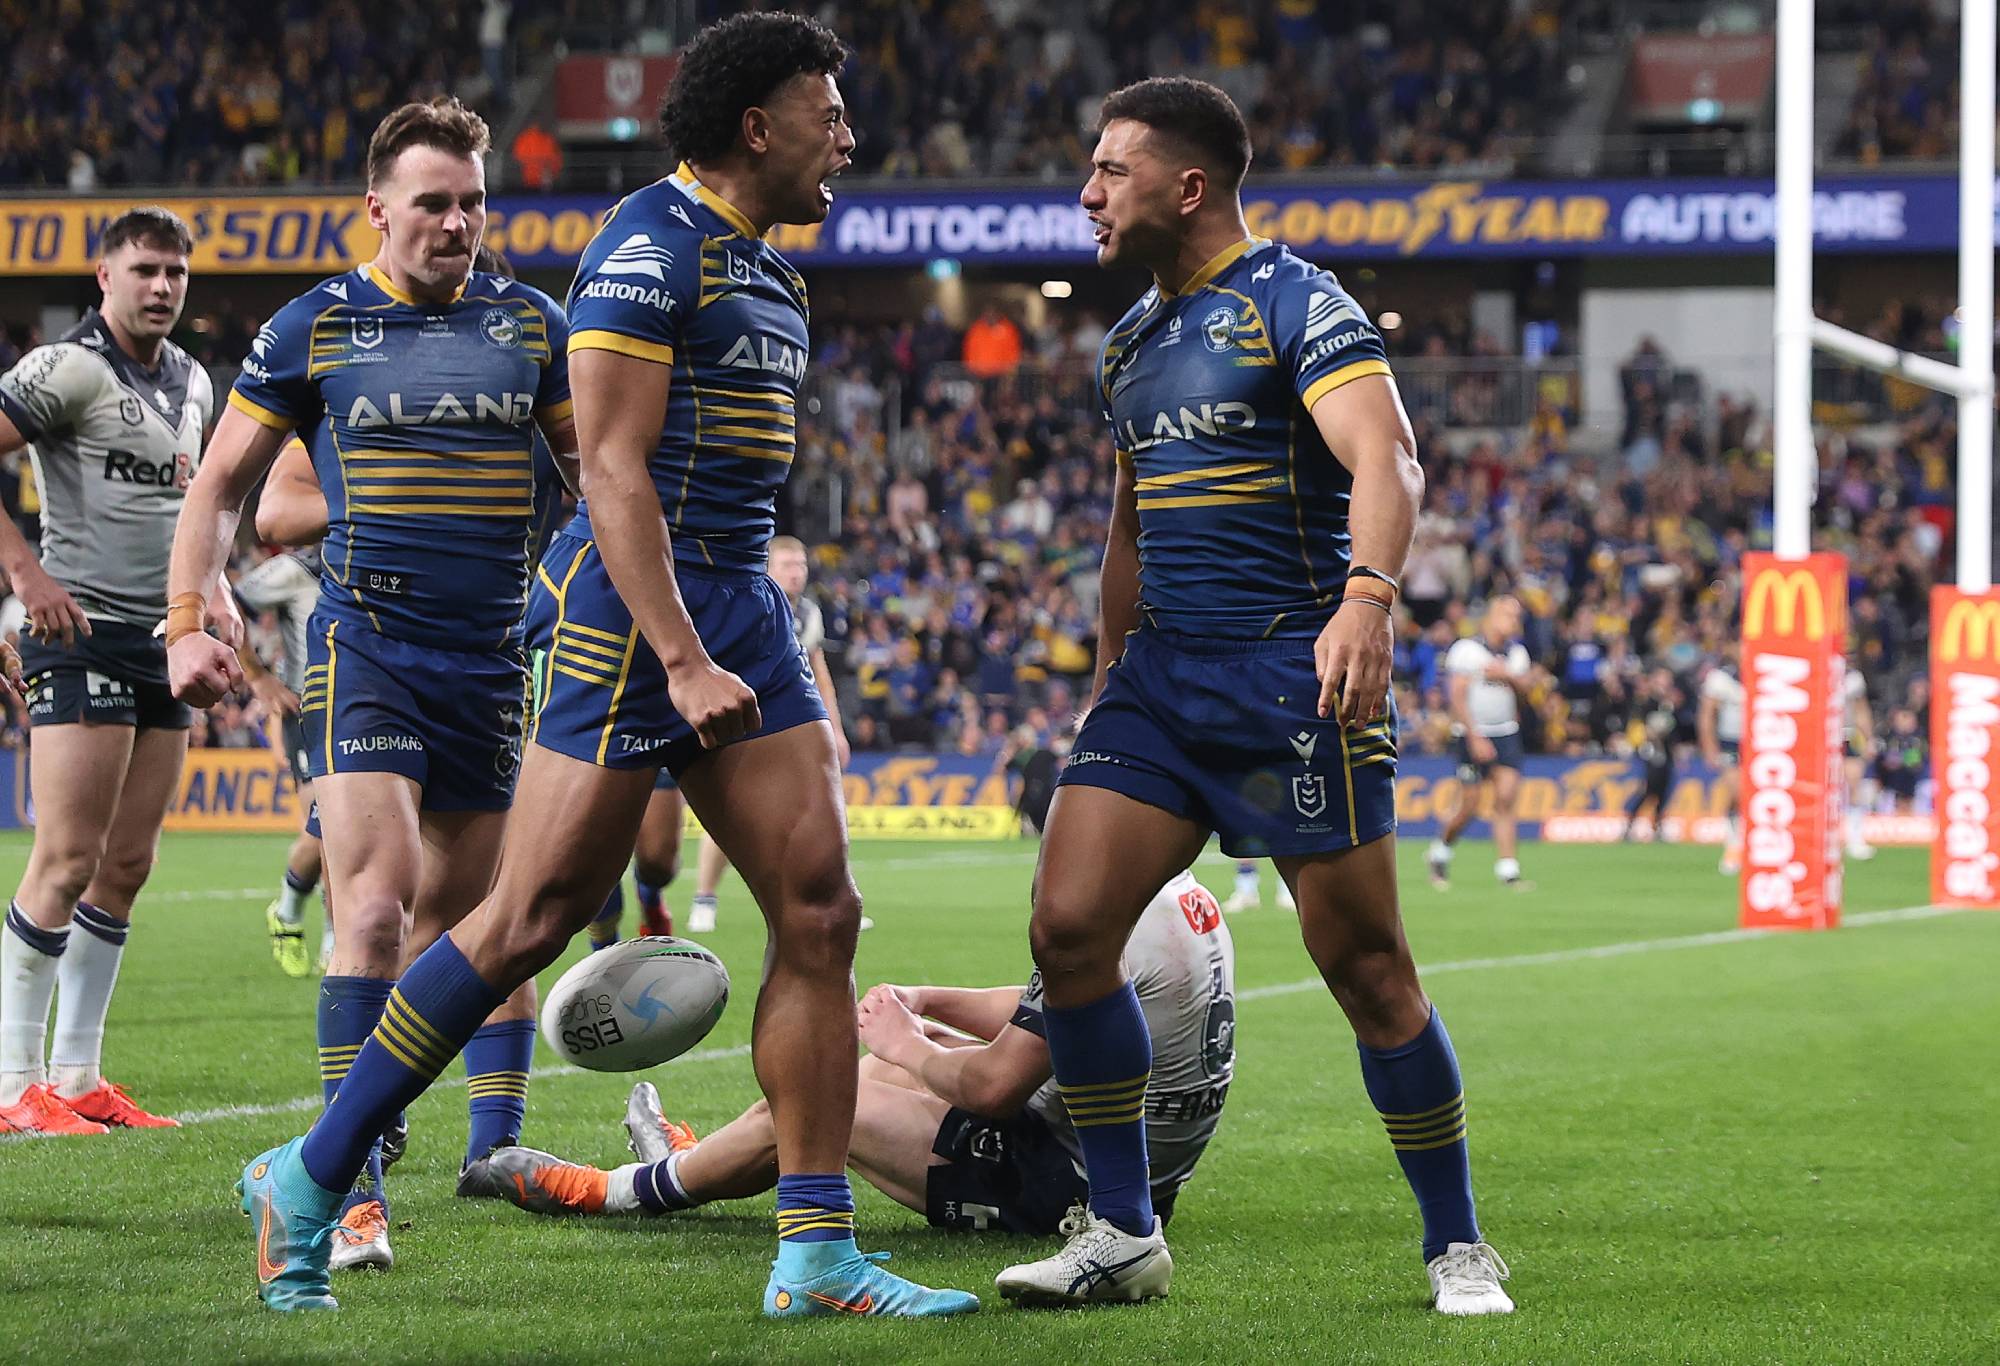 SYDNEY, AUSTRALIA - SEPTEMBER 01: Will Penisini of the Eels celebrates with Waqa Blake of the Eels after scoring a try during the round 25 NRL match between the Parramatta Eels and the Melbourne Storm at CommBank Stadium on September 01, 2022, in Sydney, Australia. (Photo by Cameron Spencer/Getty Images)